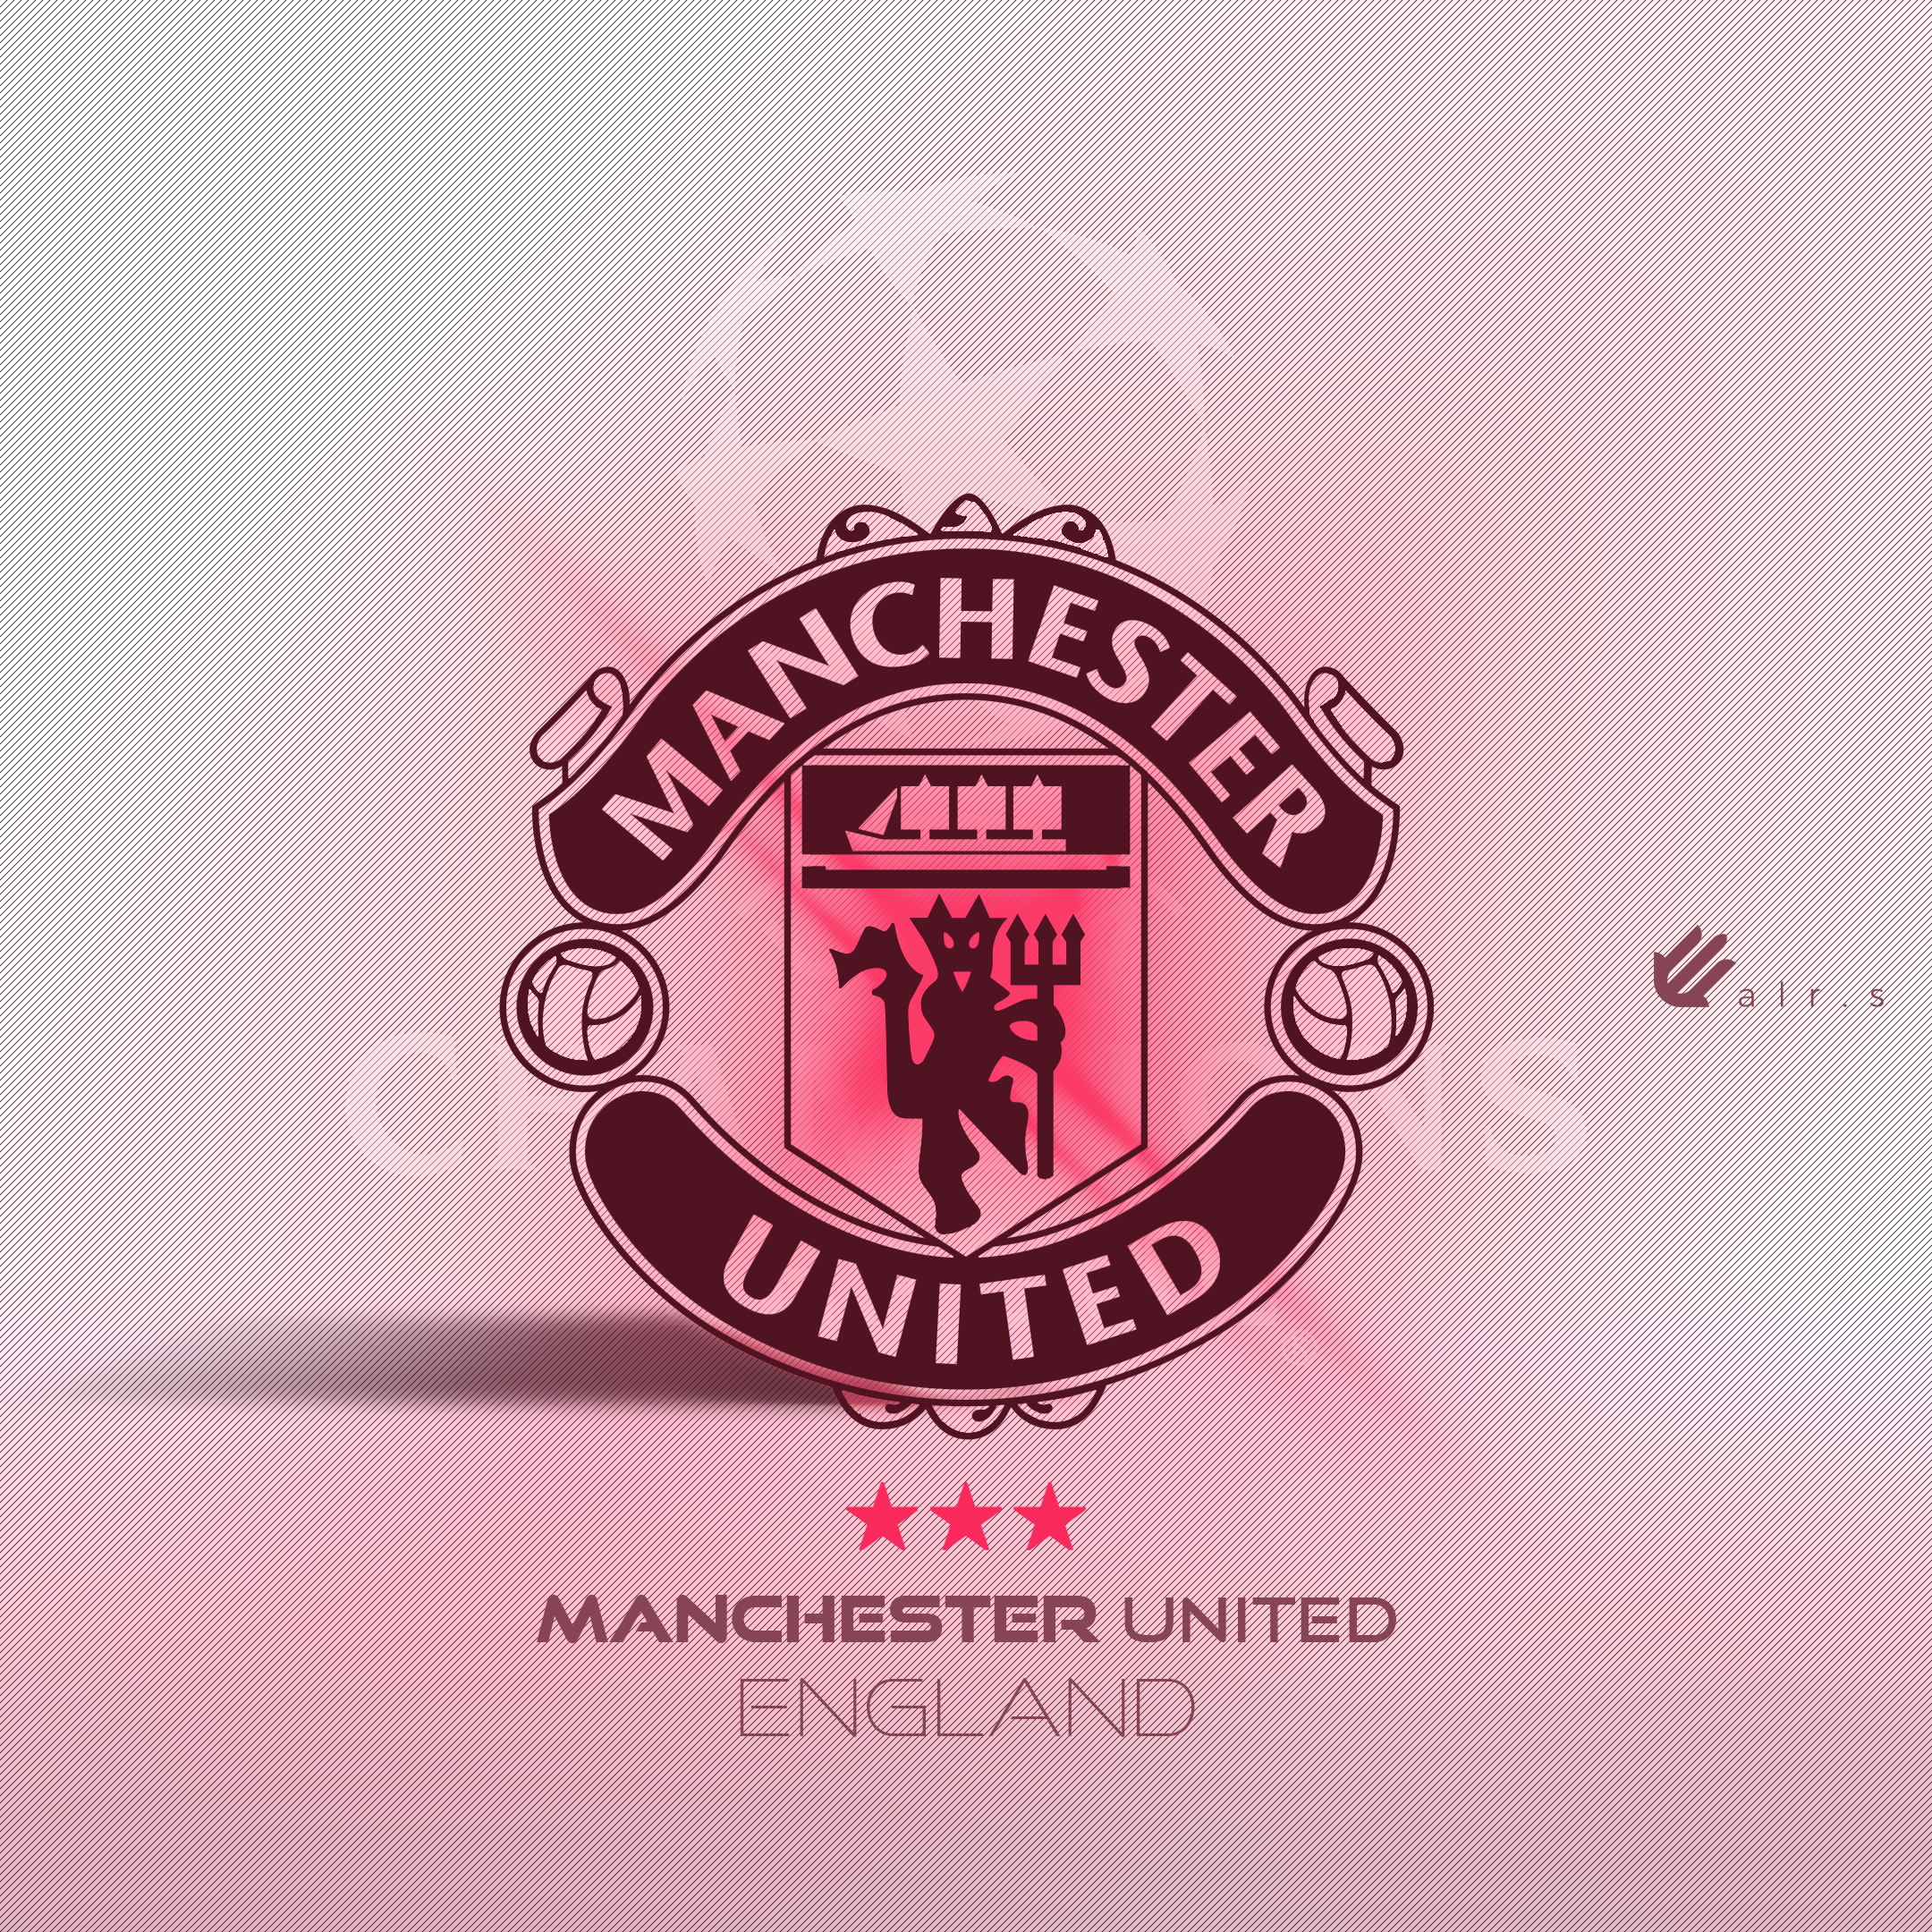 Football Manchester United Logo Champions League Clubs Graphic Design Creativity Red Photography Col 2160x2160